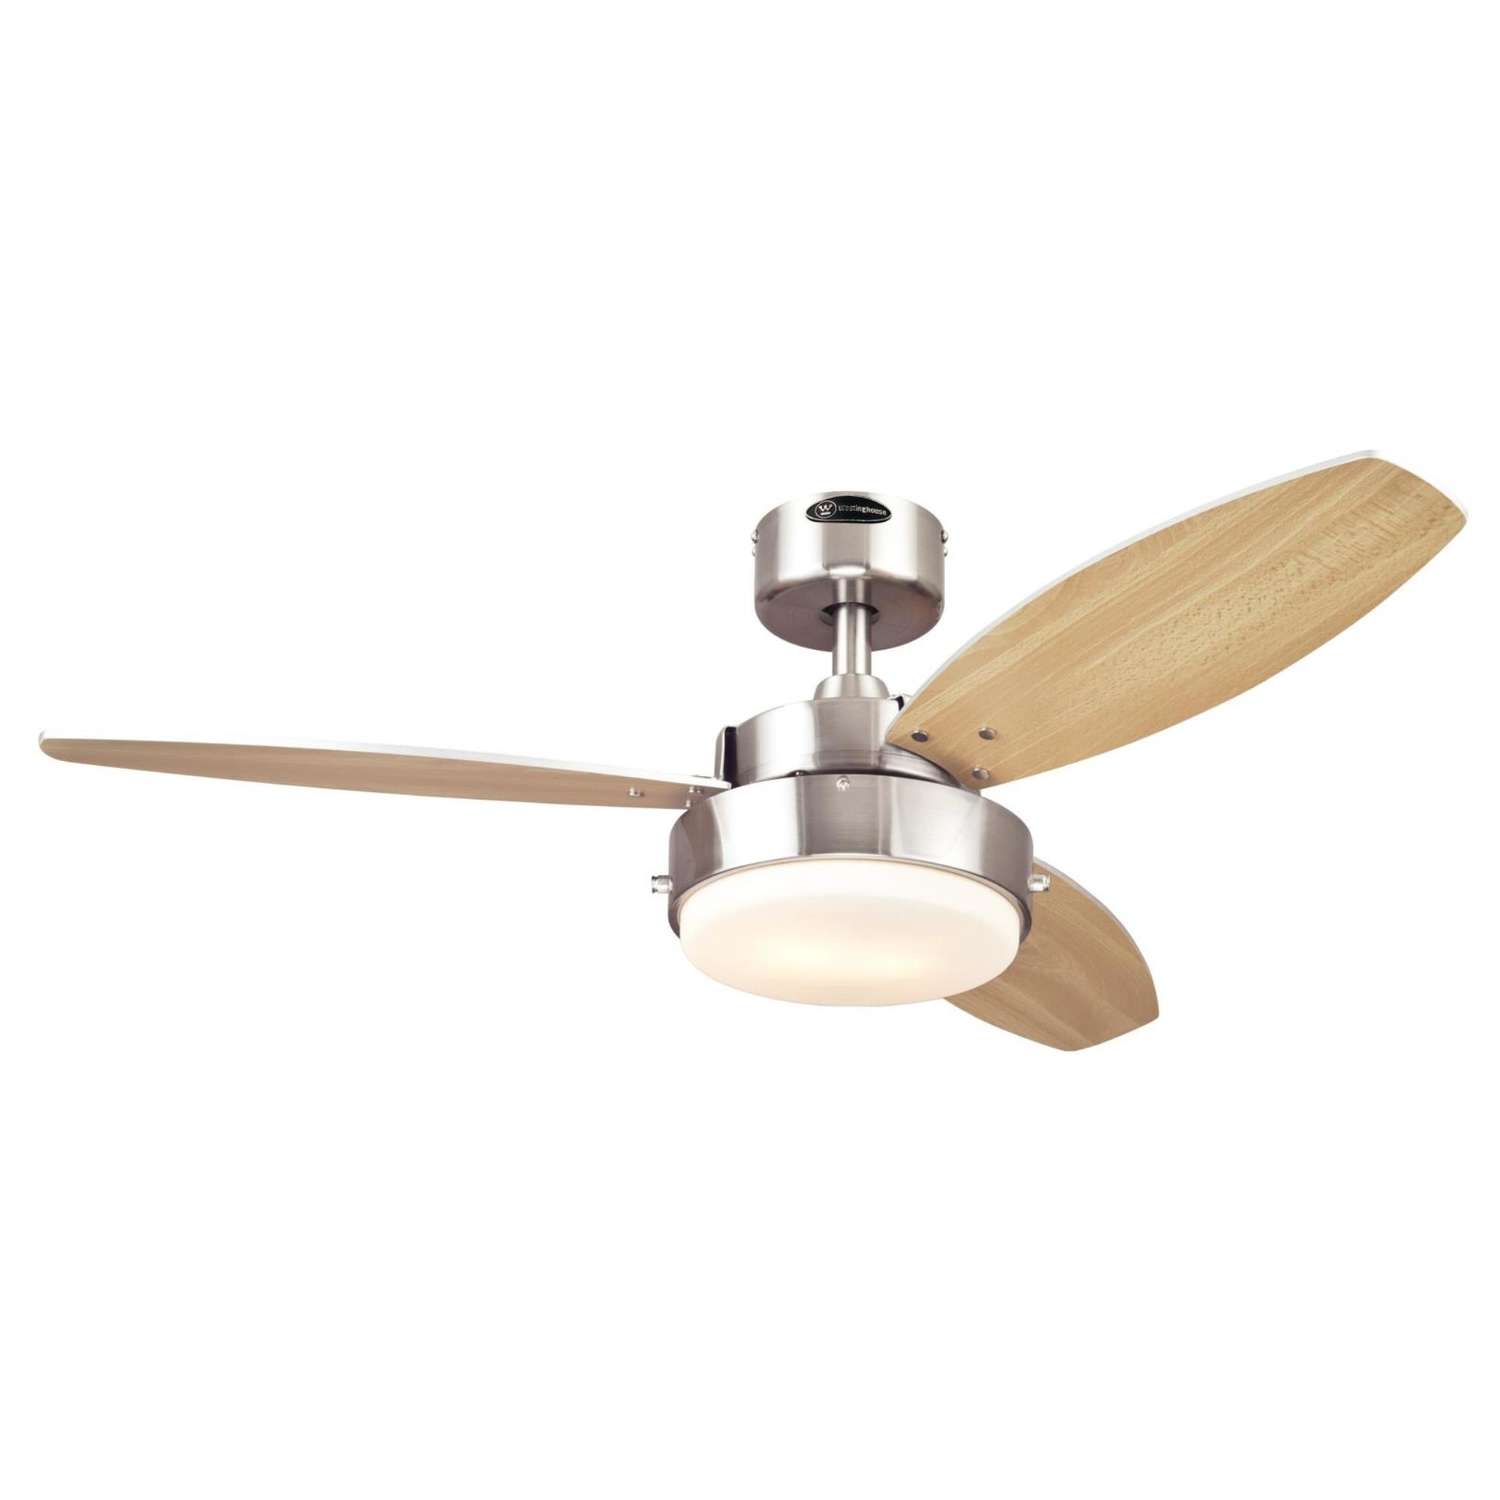 Westinghouse Colosseum Ceiling Fan Brushed Nickel 